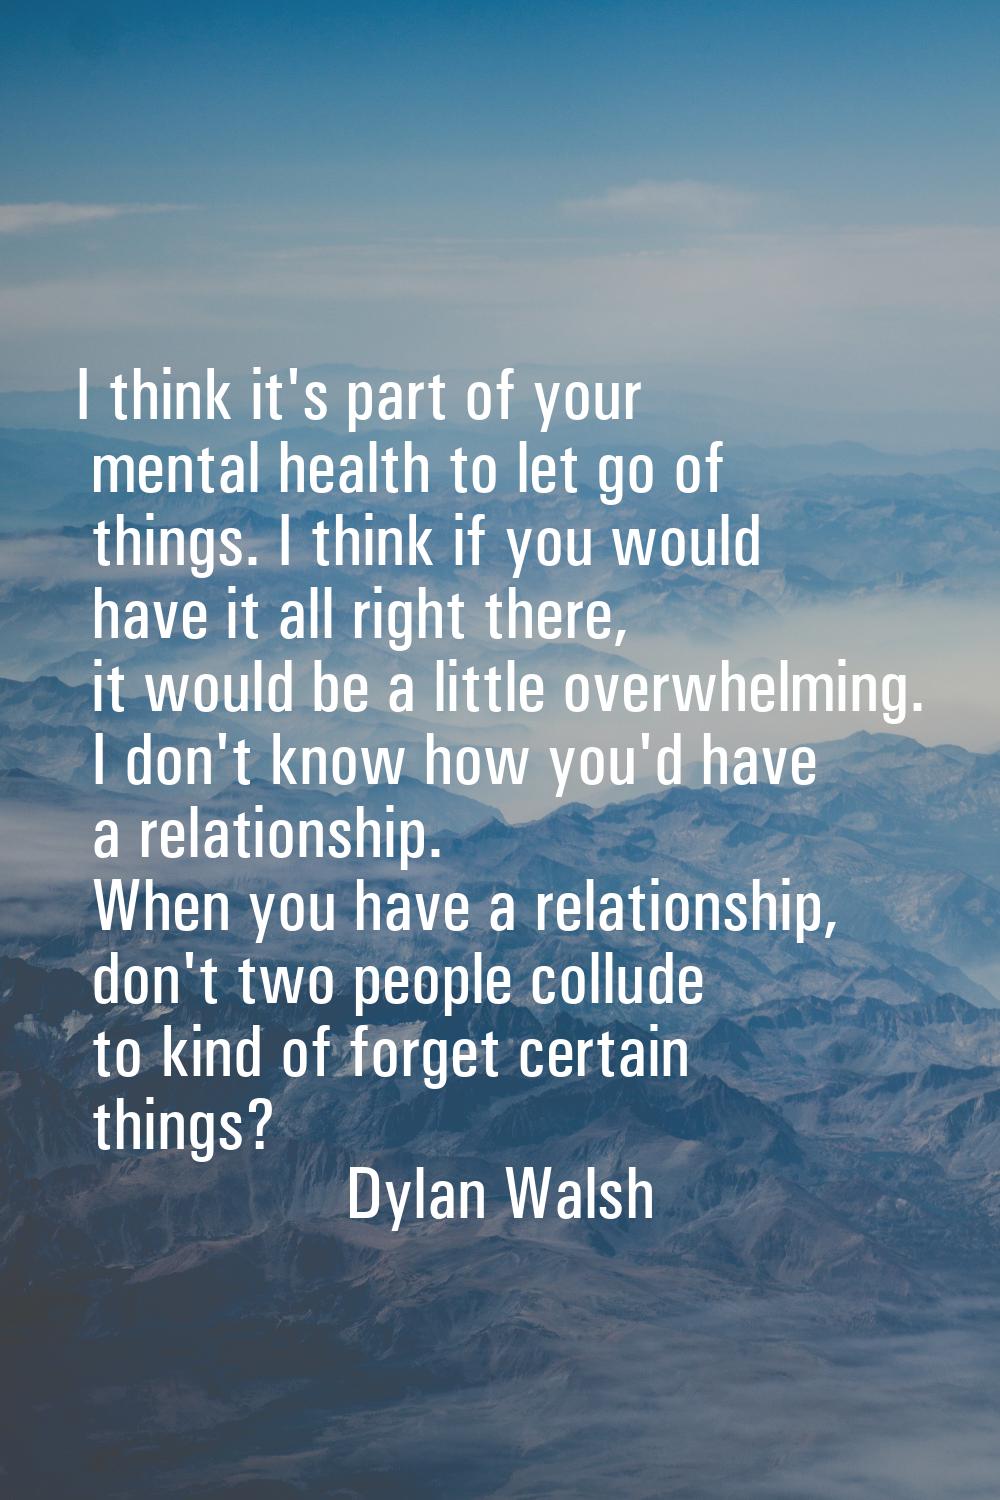 I think it's part of your mental health to let go of things. I think if you would have it all right